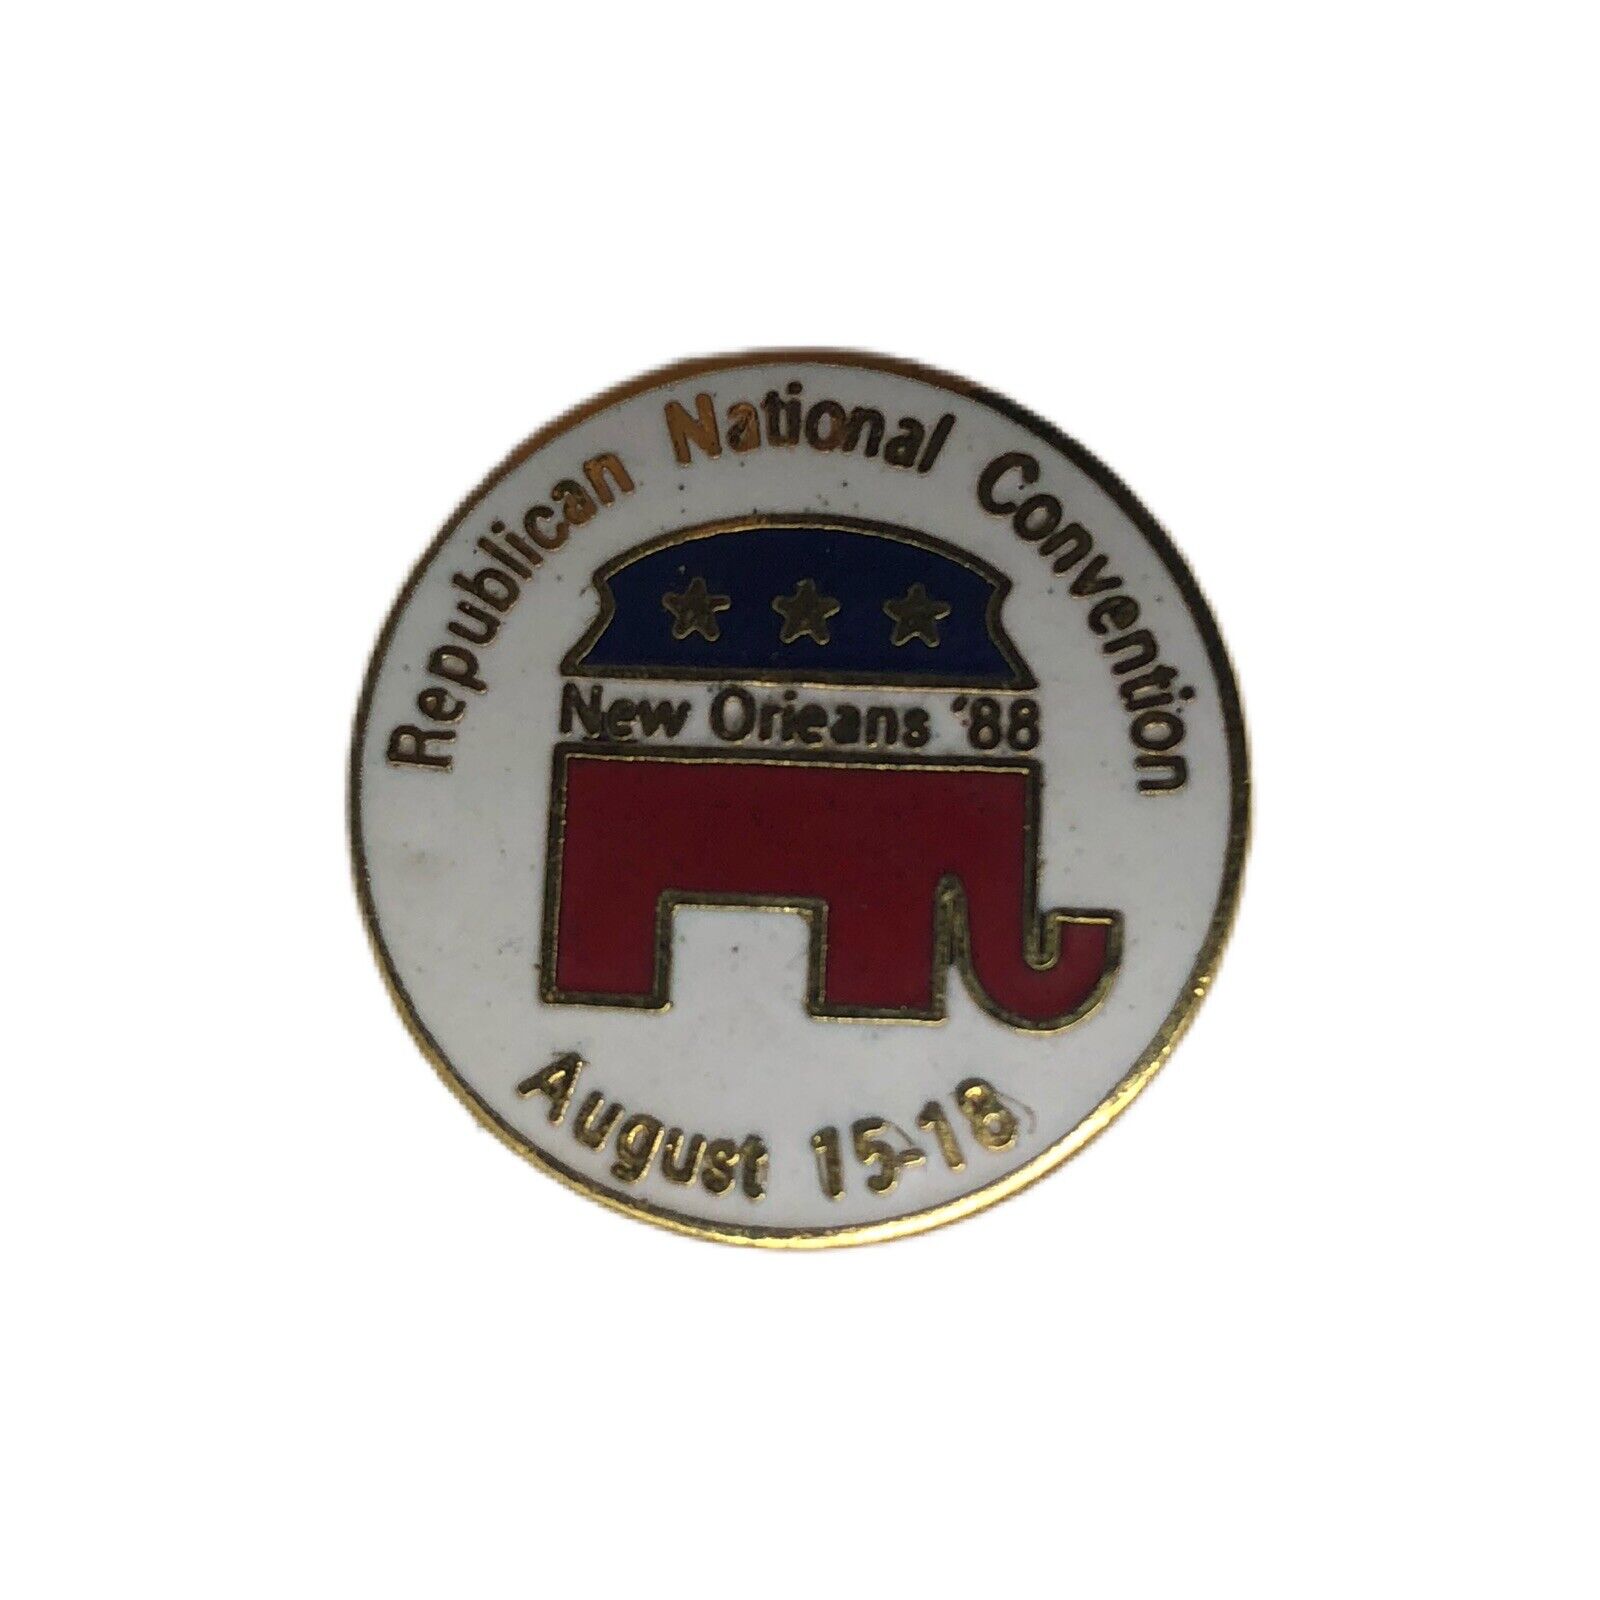 1988 Republican National Convention RNC New Orleans Lapel Pin Gold Tone Vintage